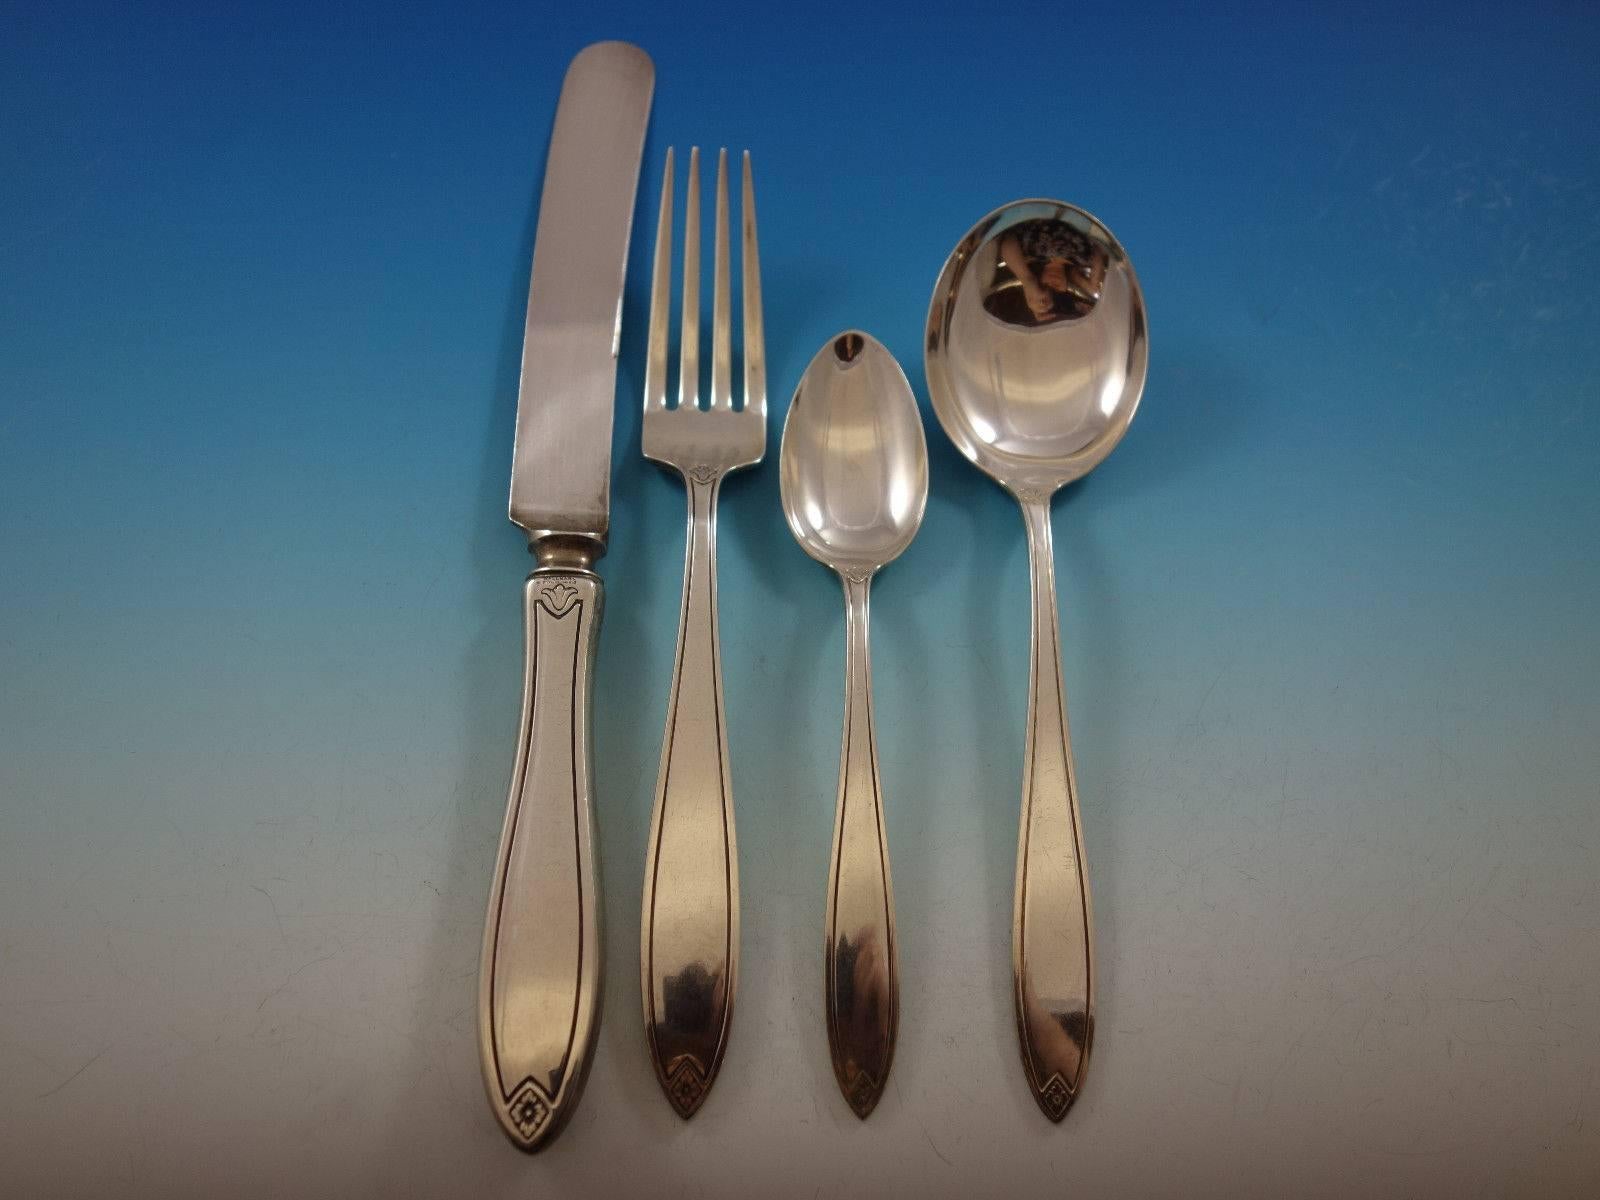 Fiesta by Hallmark sterling silver dinner size flatware set, 26 pieces. This set includes: 

Six dinner size knives, 10